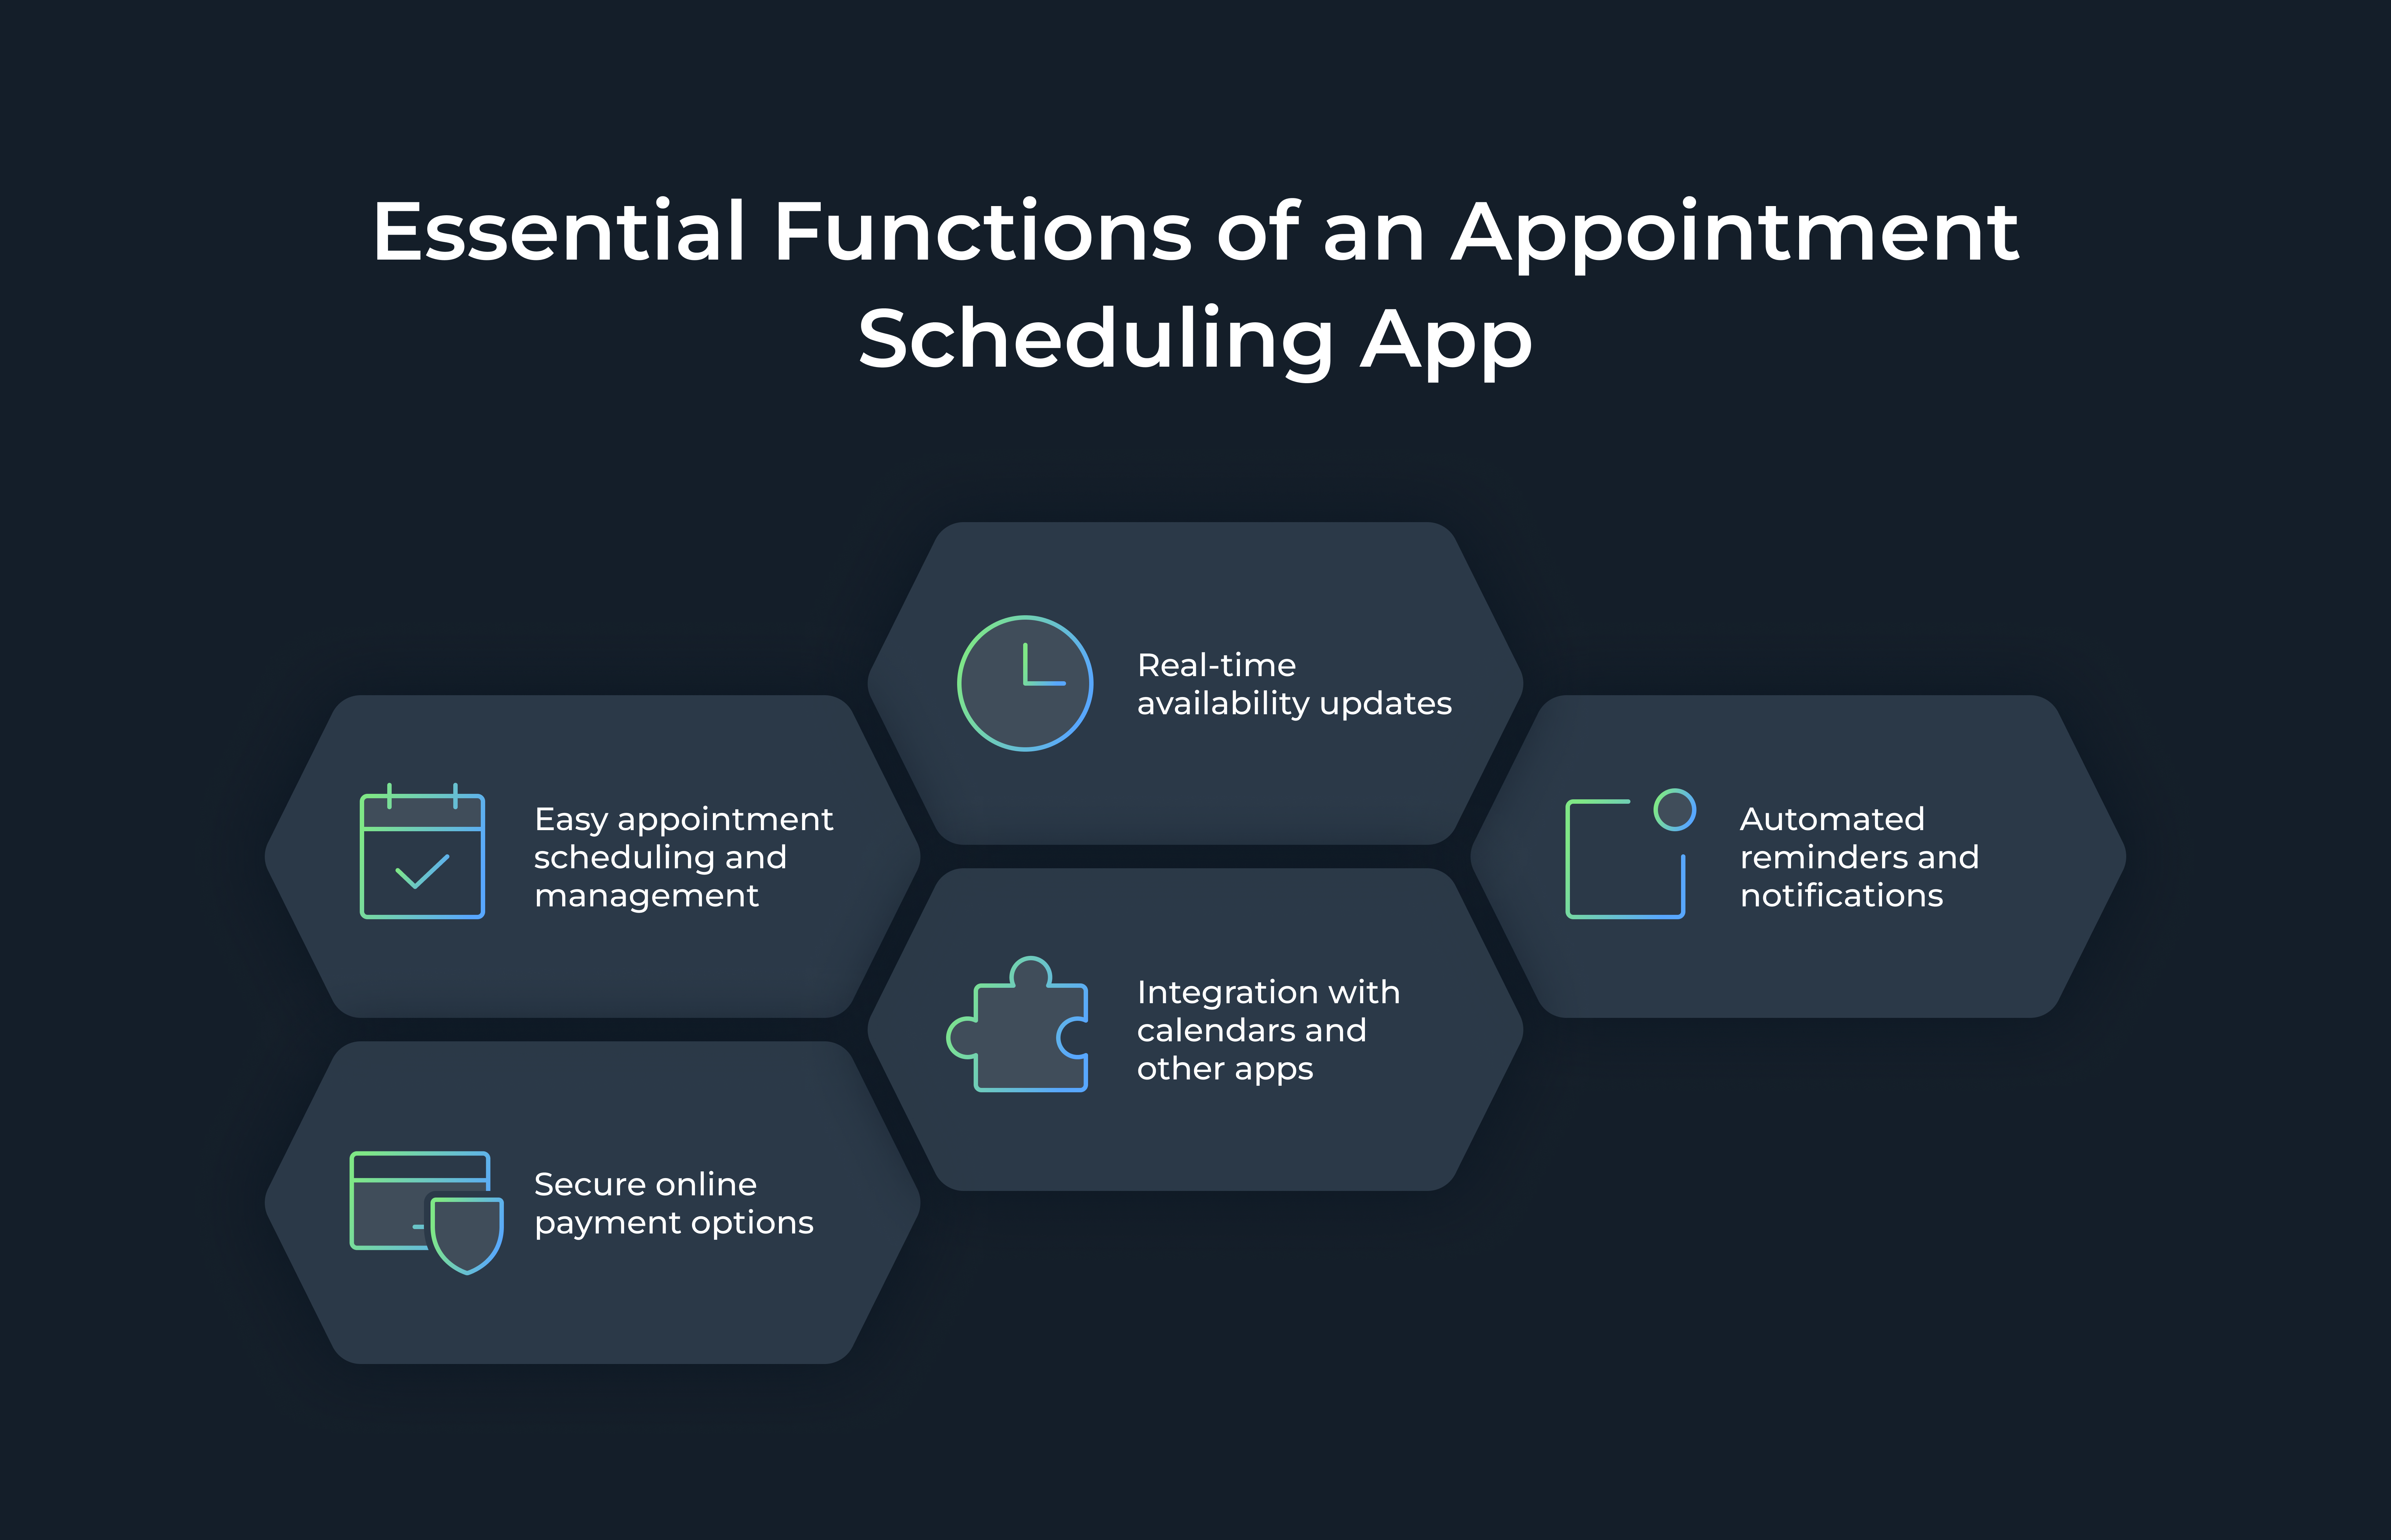 Essential Functions of an Appointment Scheduling App: Easy appointment scheduling and management, Real-time availability updates, Automated reminders and notifications, Secure online payment options, Integration with calendars and other apps
